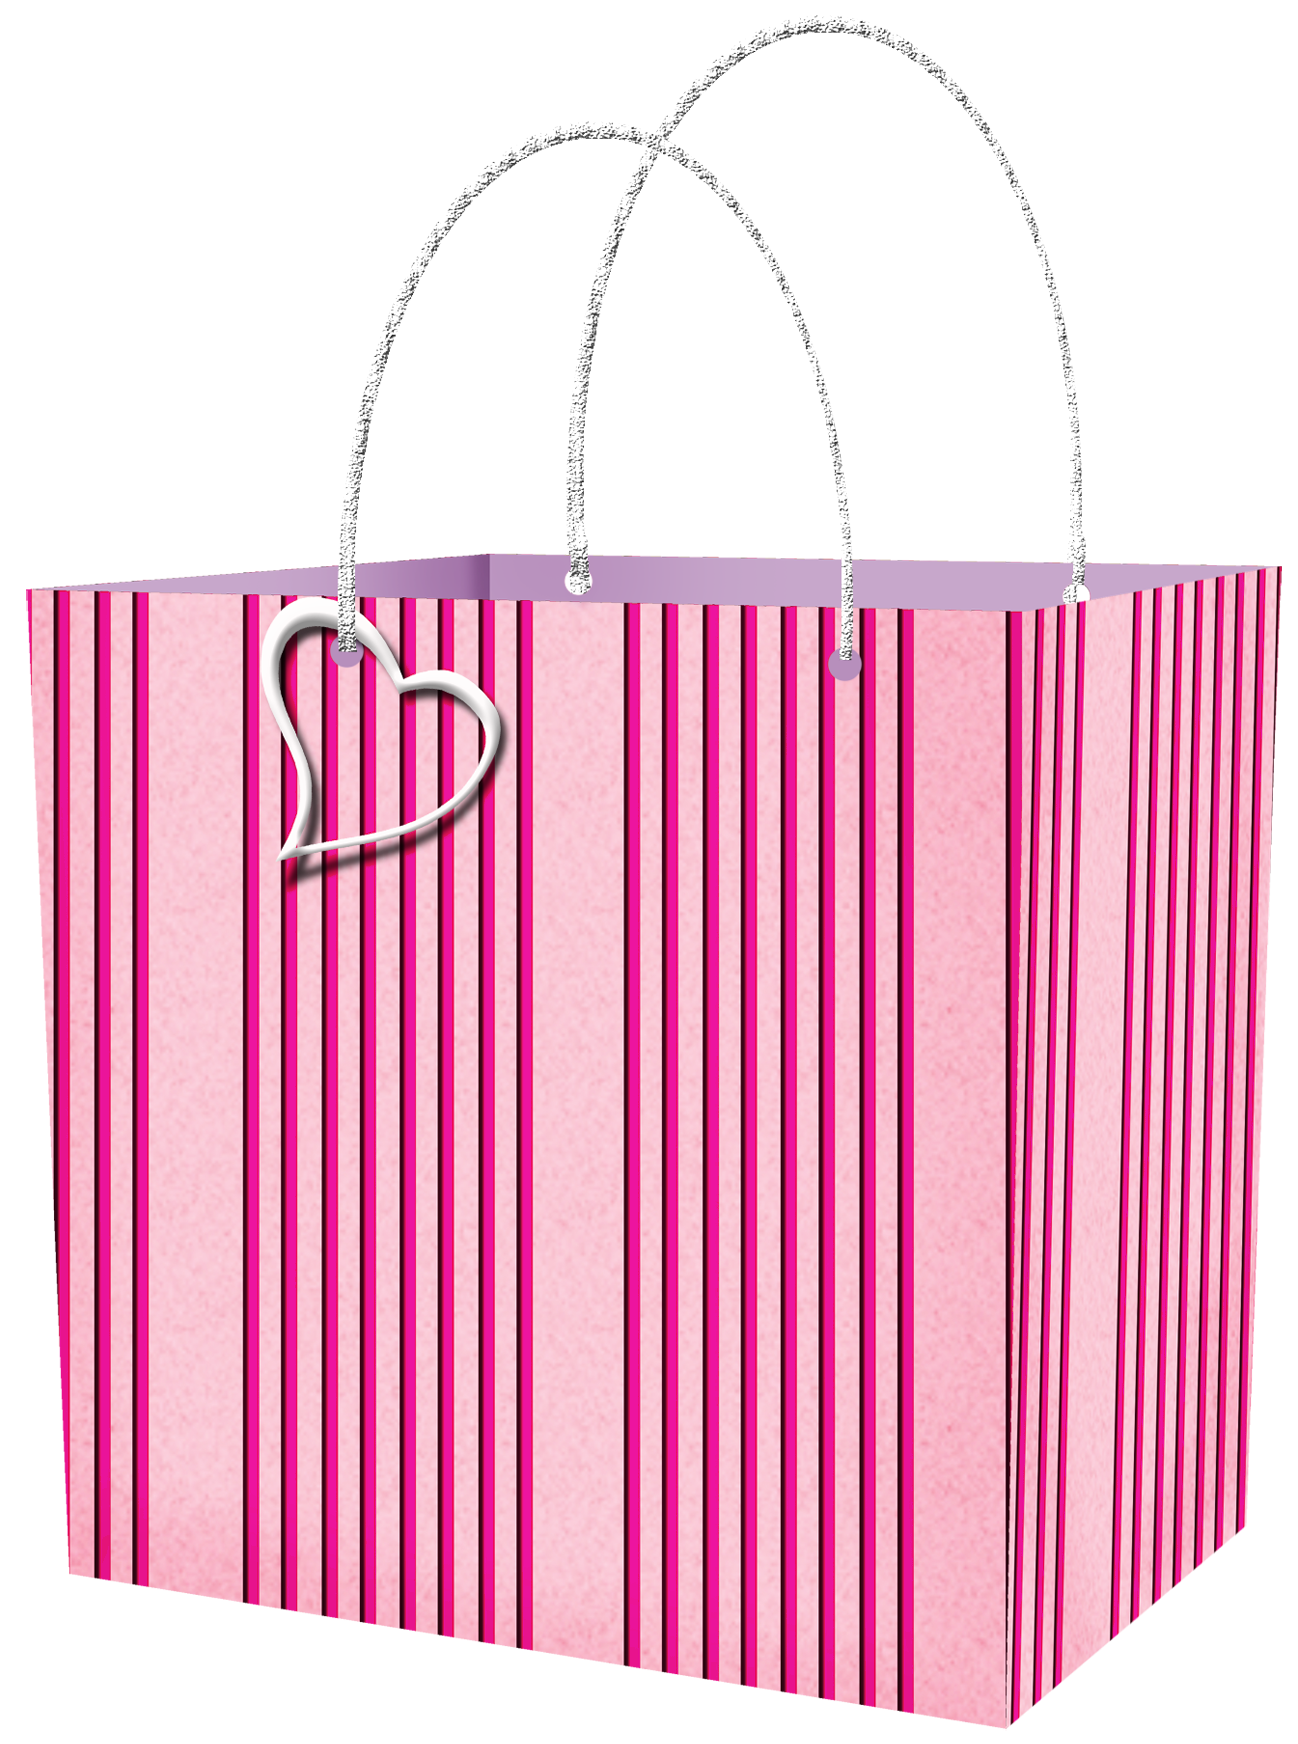 Gift Bag Pink PNG Clipart​  Gallery Yopriceville - High-Quality Free  Images and Transparent PNG Clipart